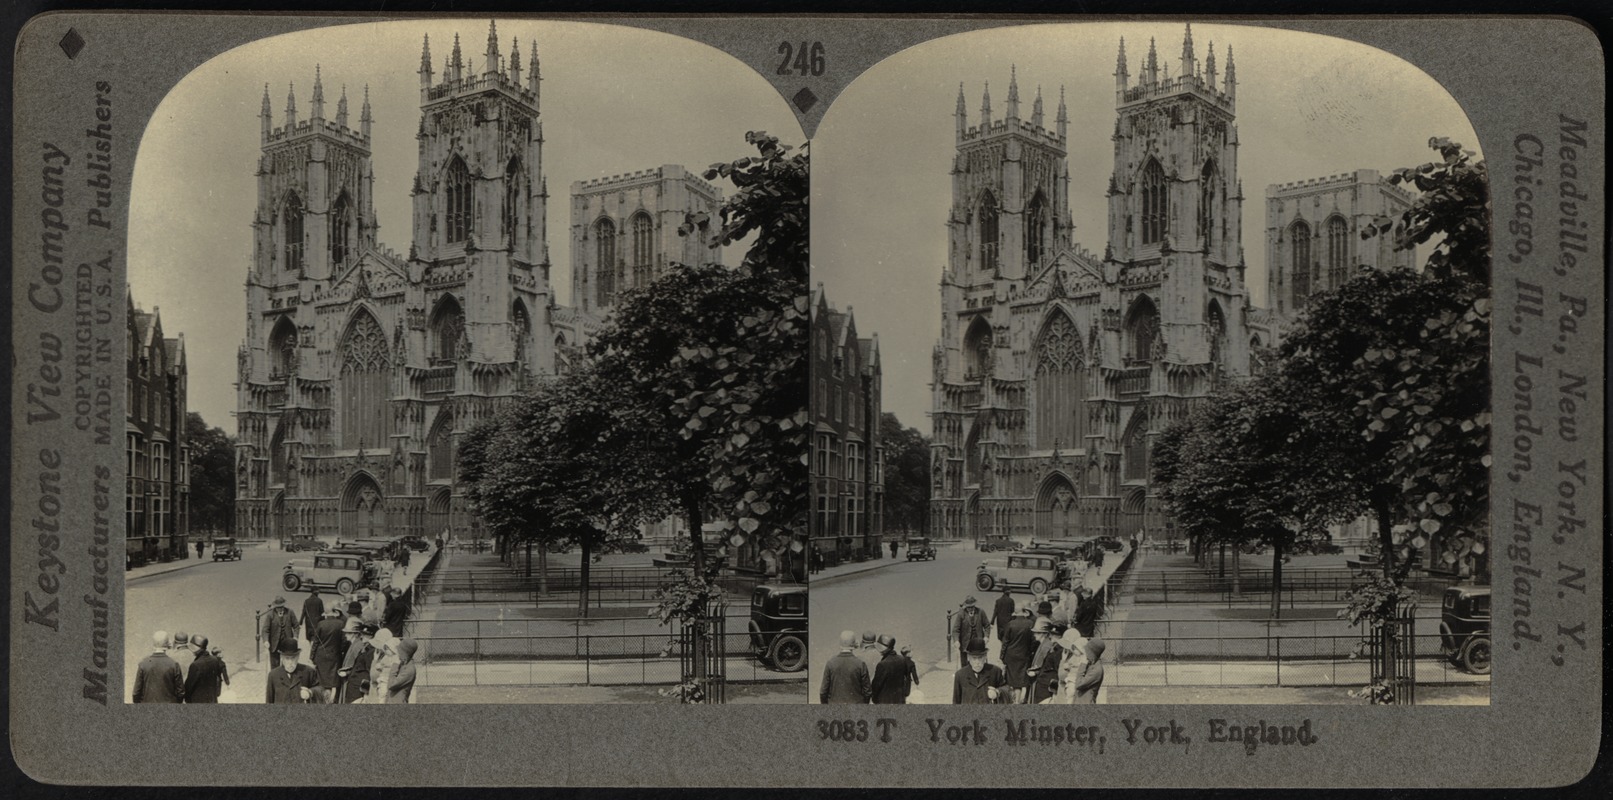 West front and towers of York Minster, York, England